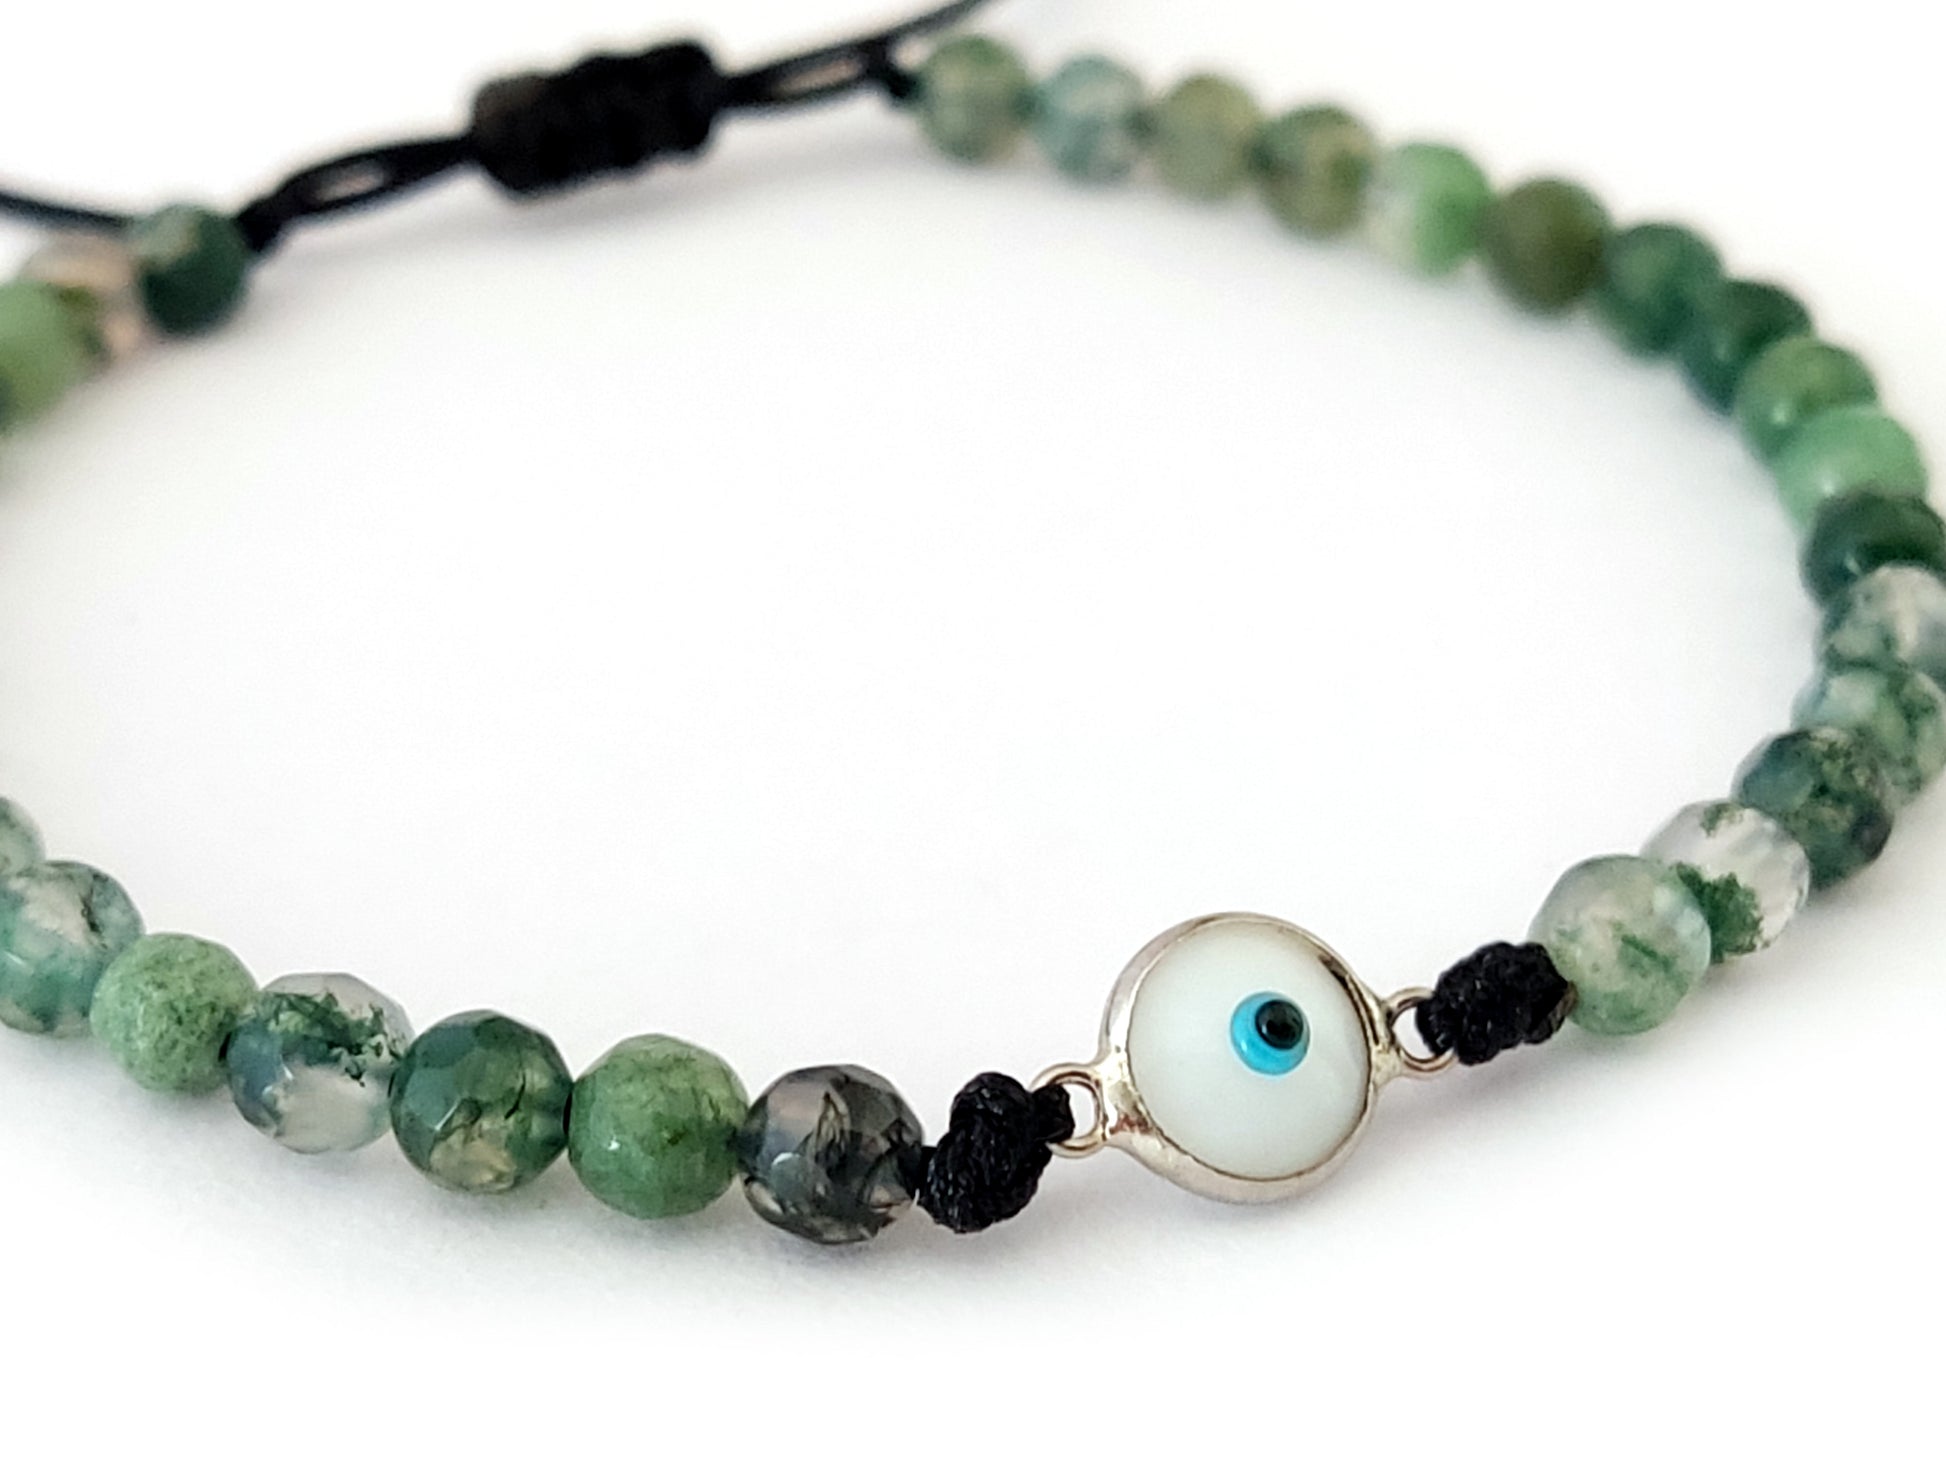 Silver 925 Evil Eye Bracelet with Natural Green Agate - Handcrafted in Greece